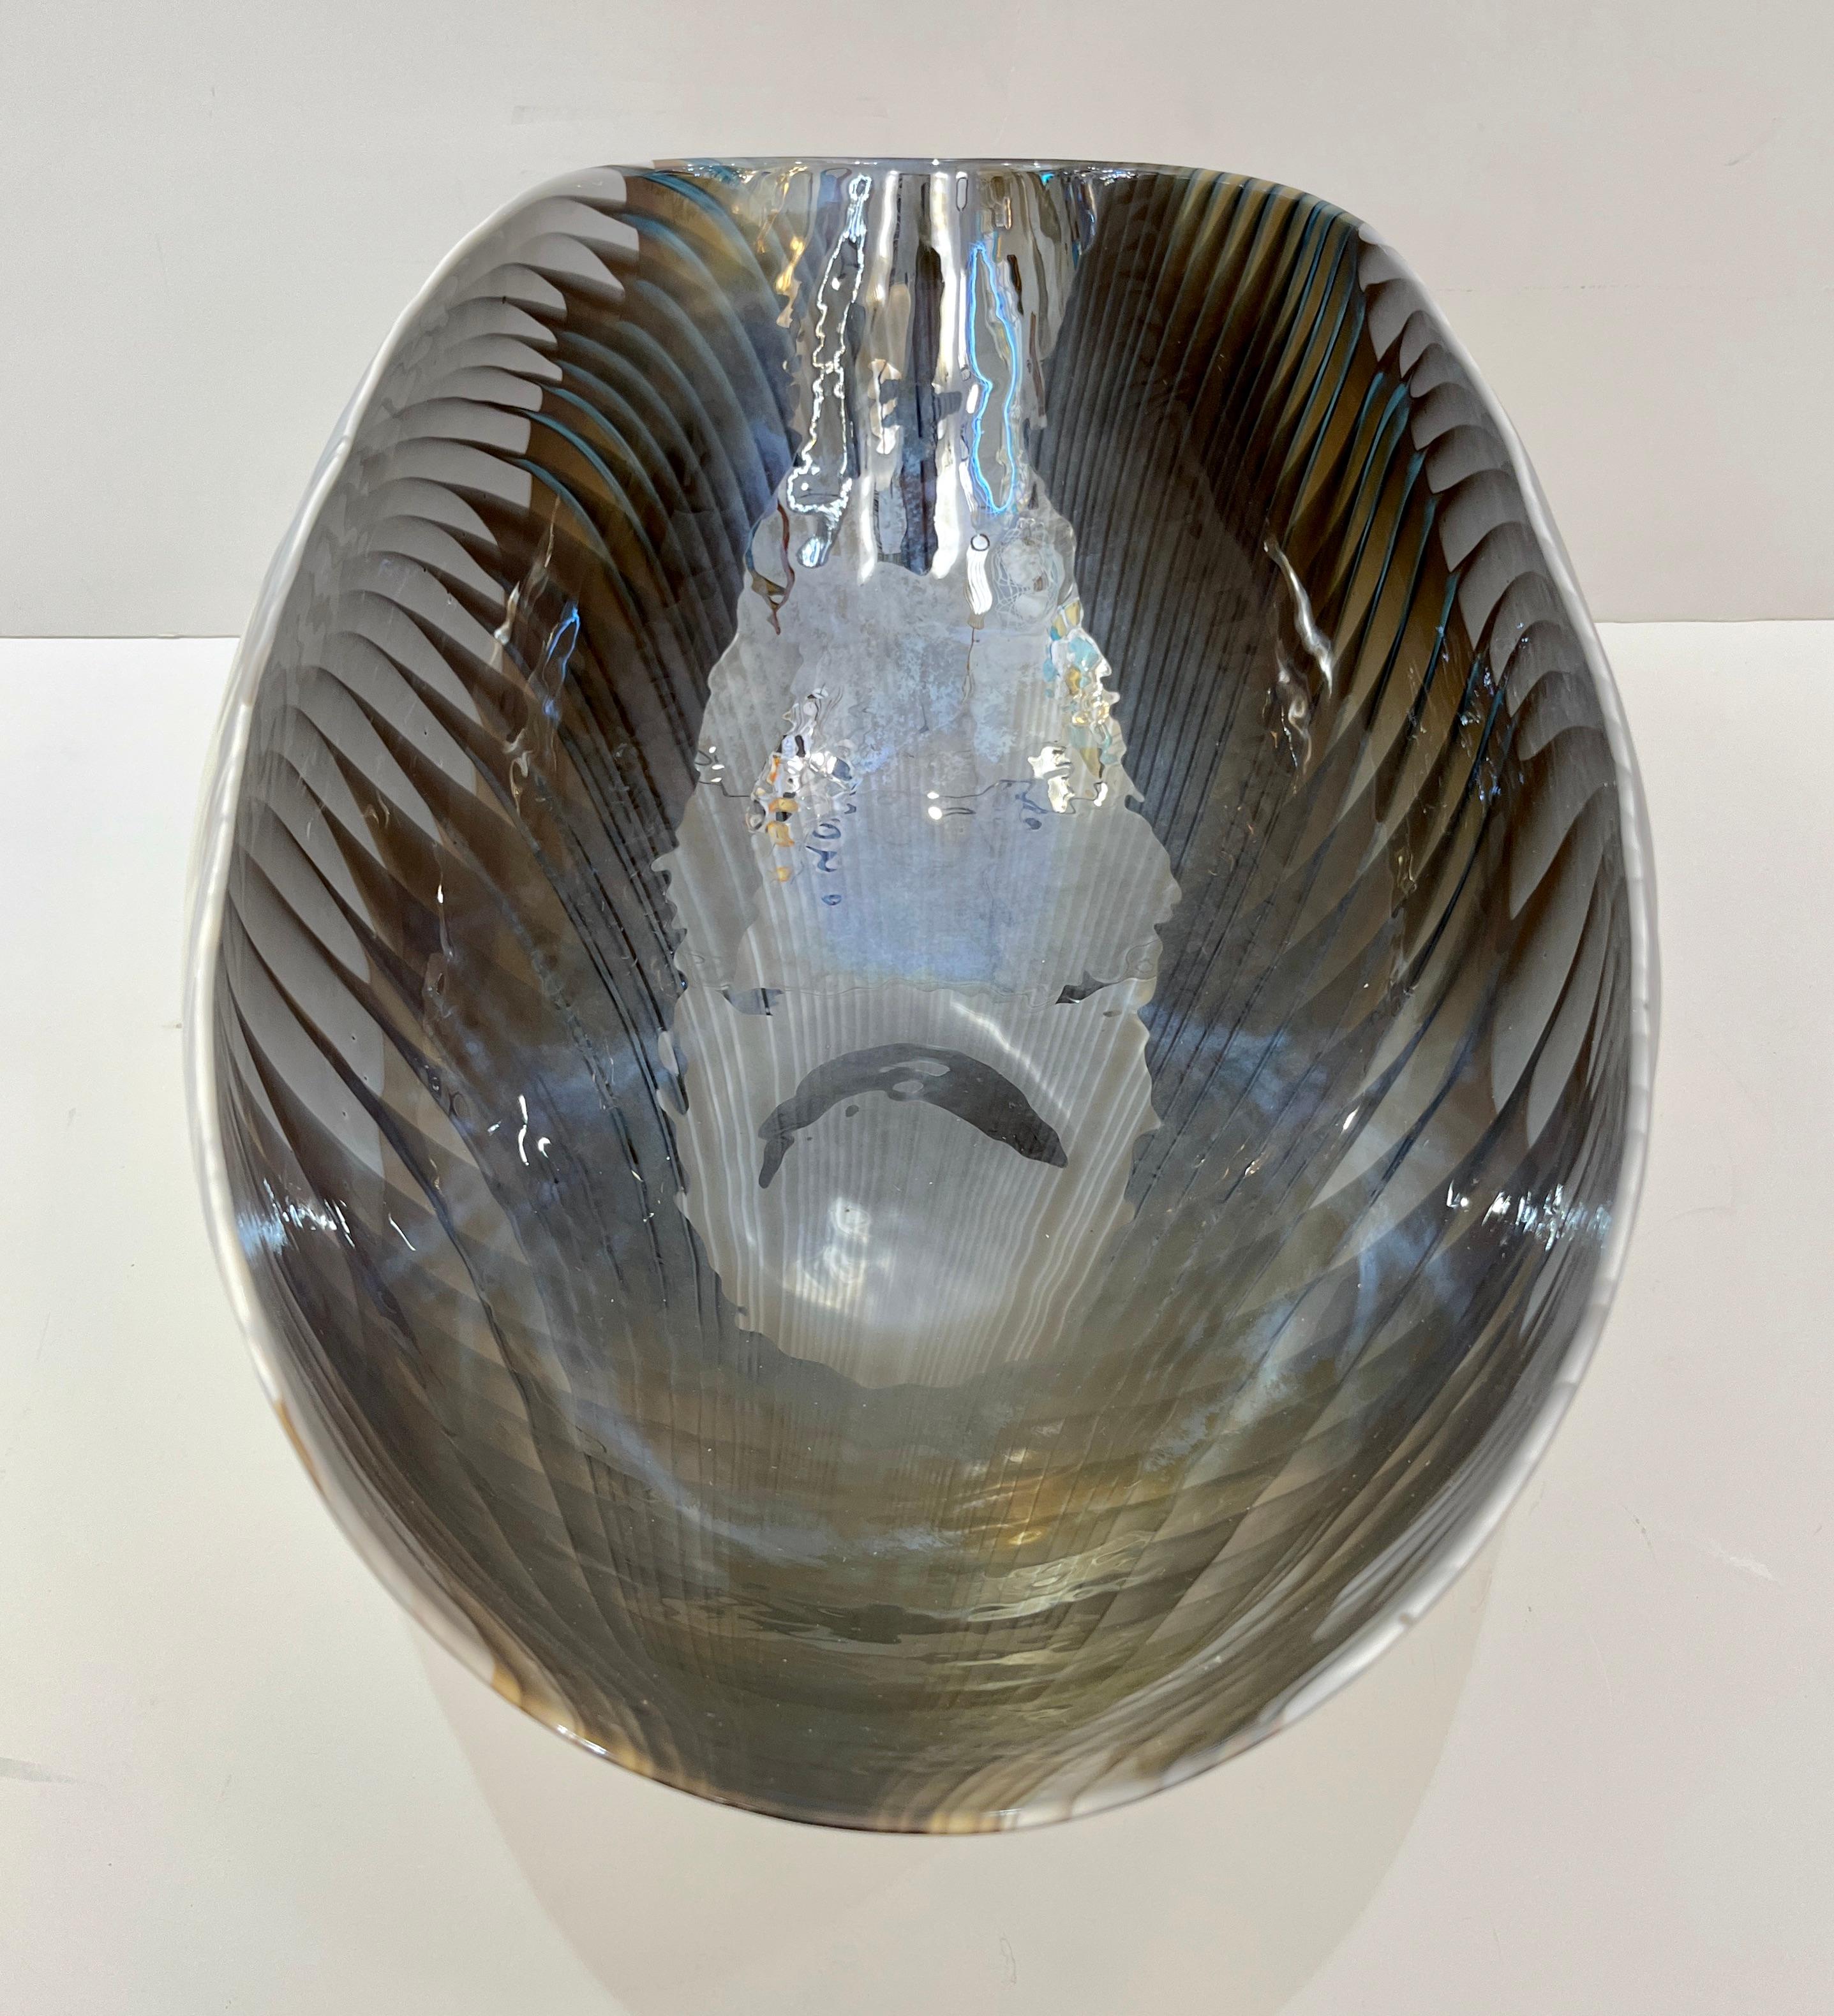 Contemporary 2000 Italian Blue Gray White Taupe Iridescent Murano Glass Monumental Shell Bowl For Sale